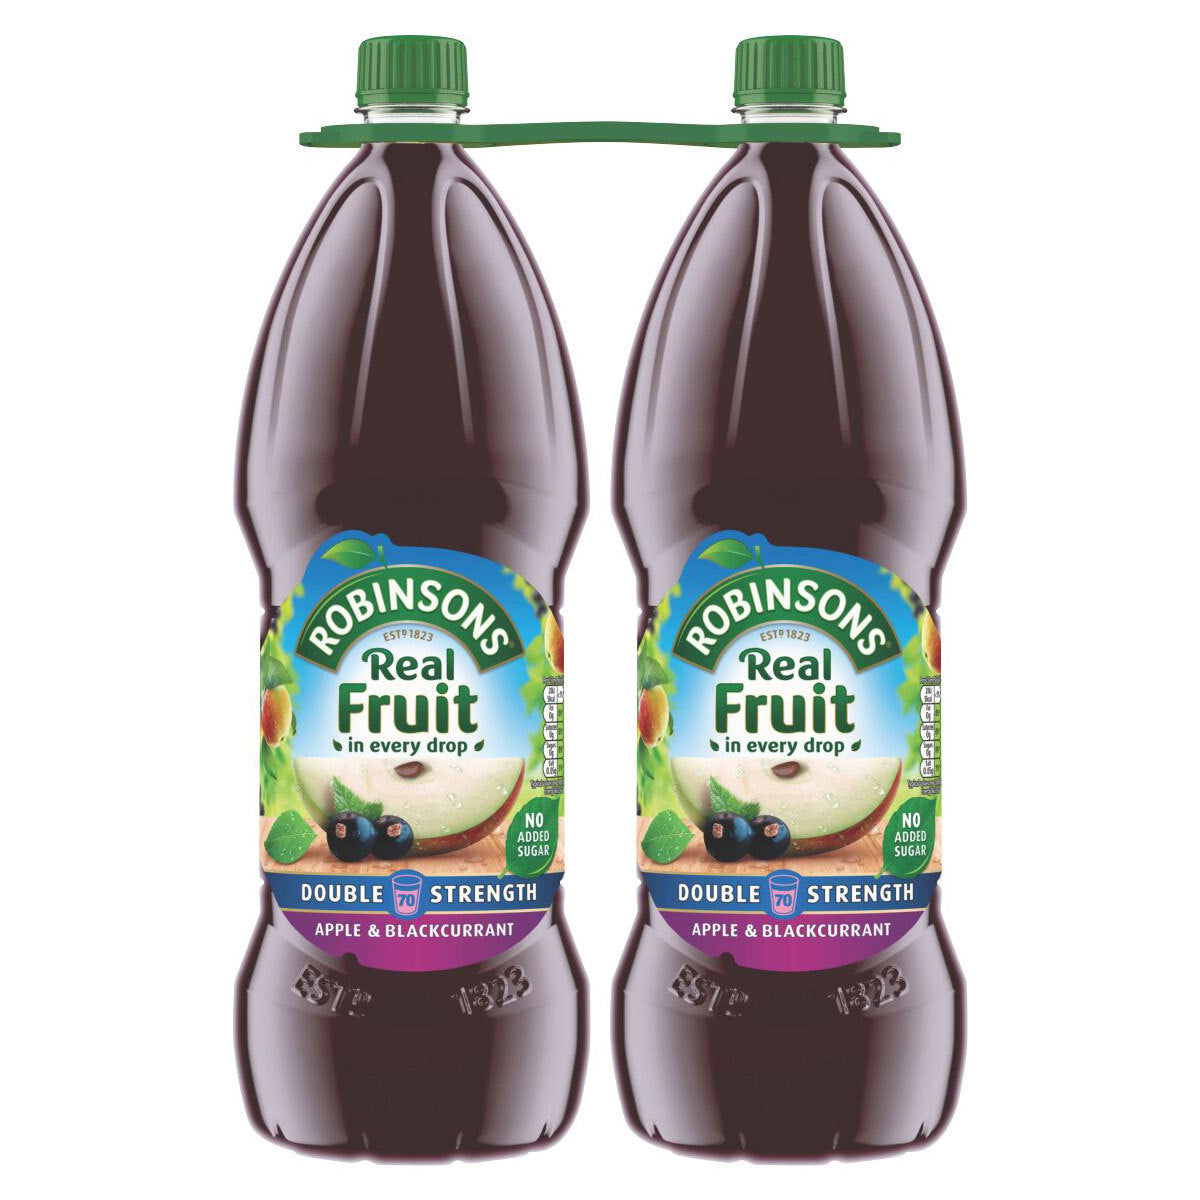 Robinsons Real Fruit Double Strength Apple & Blackcurrant Squash, 2 x 1.75L - McGrocer